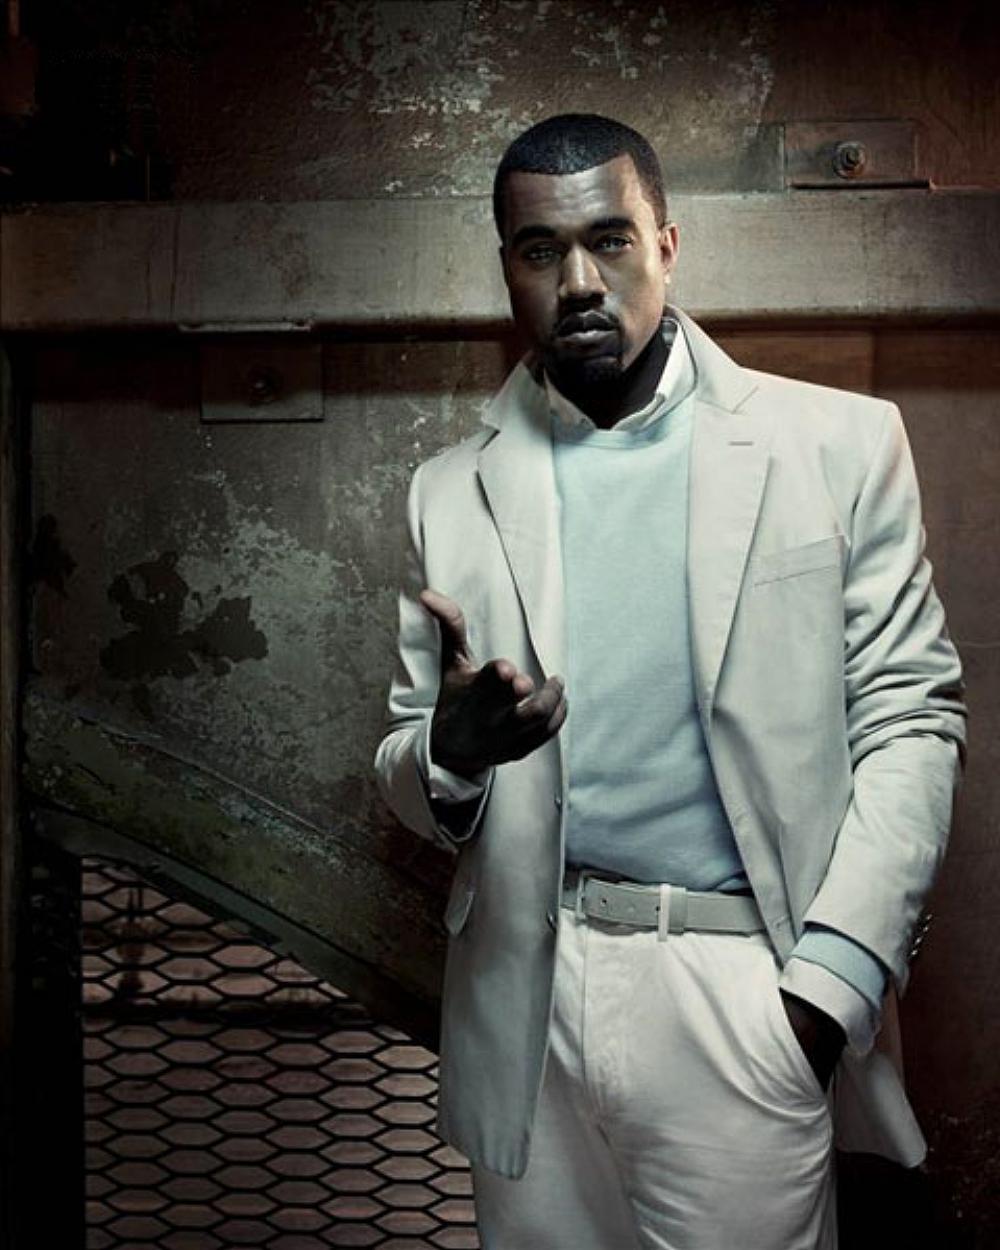 Kanye West photo 49 of 324 pics, wallpaper - photo #124651 - ThePlace2